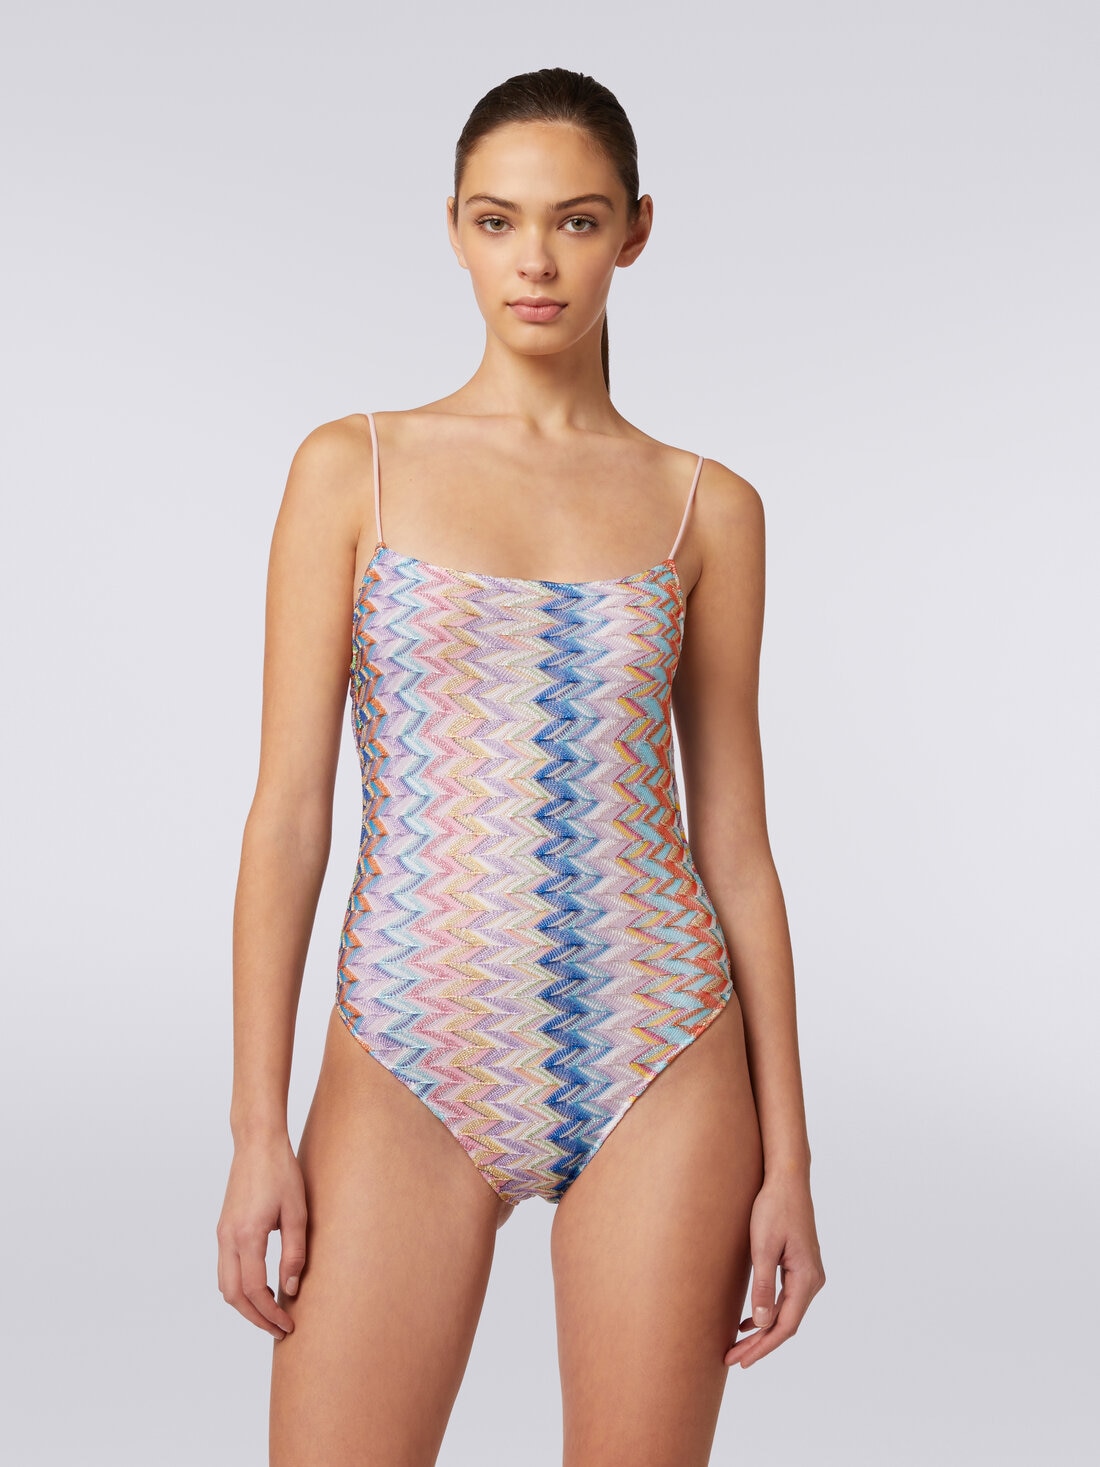 One-piece lamé swimming costume with thin adjustable straps, Multicoloured  - MC23SP03BR00XHSM9D8 - 1